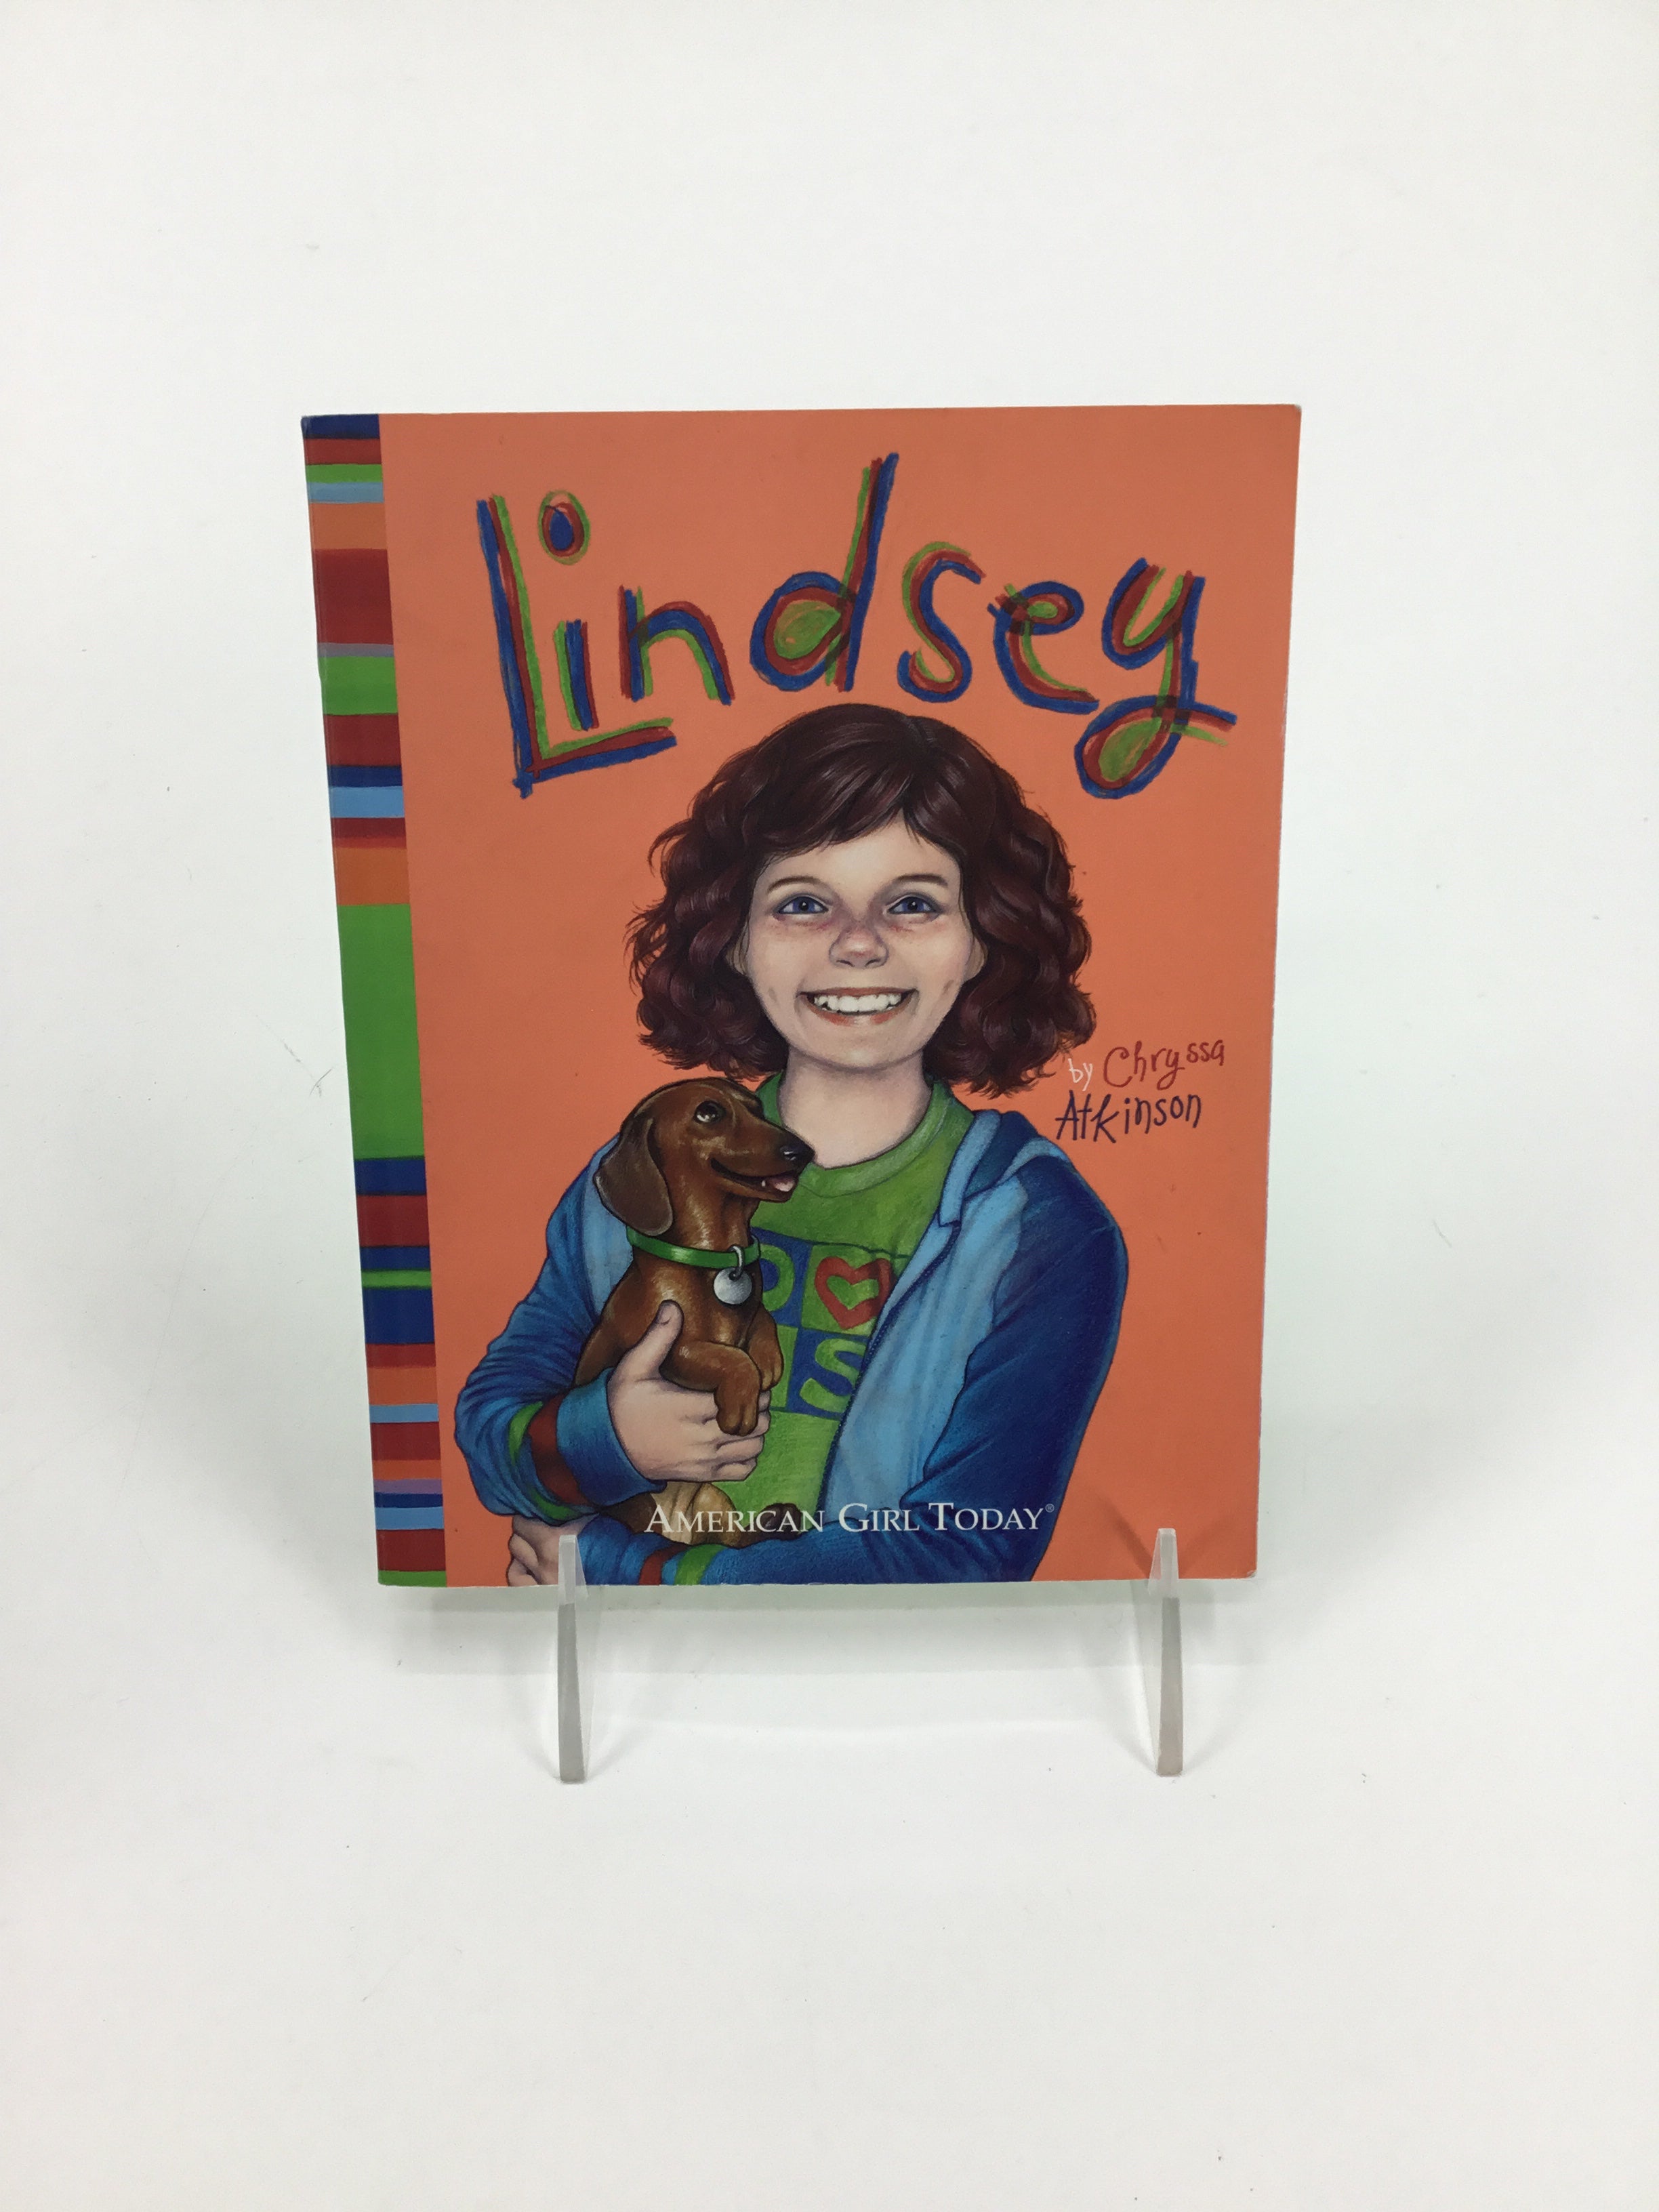 American Girl Today Lindsey Paperback Book